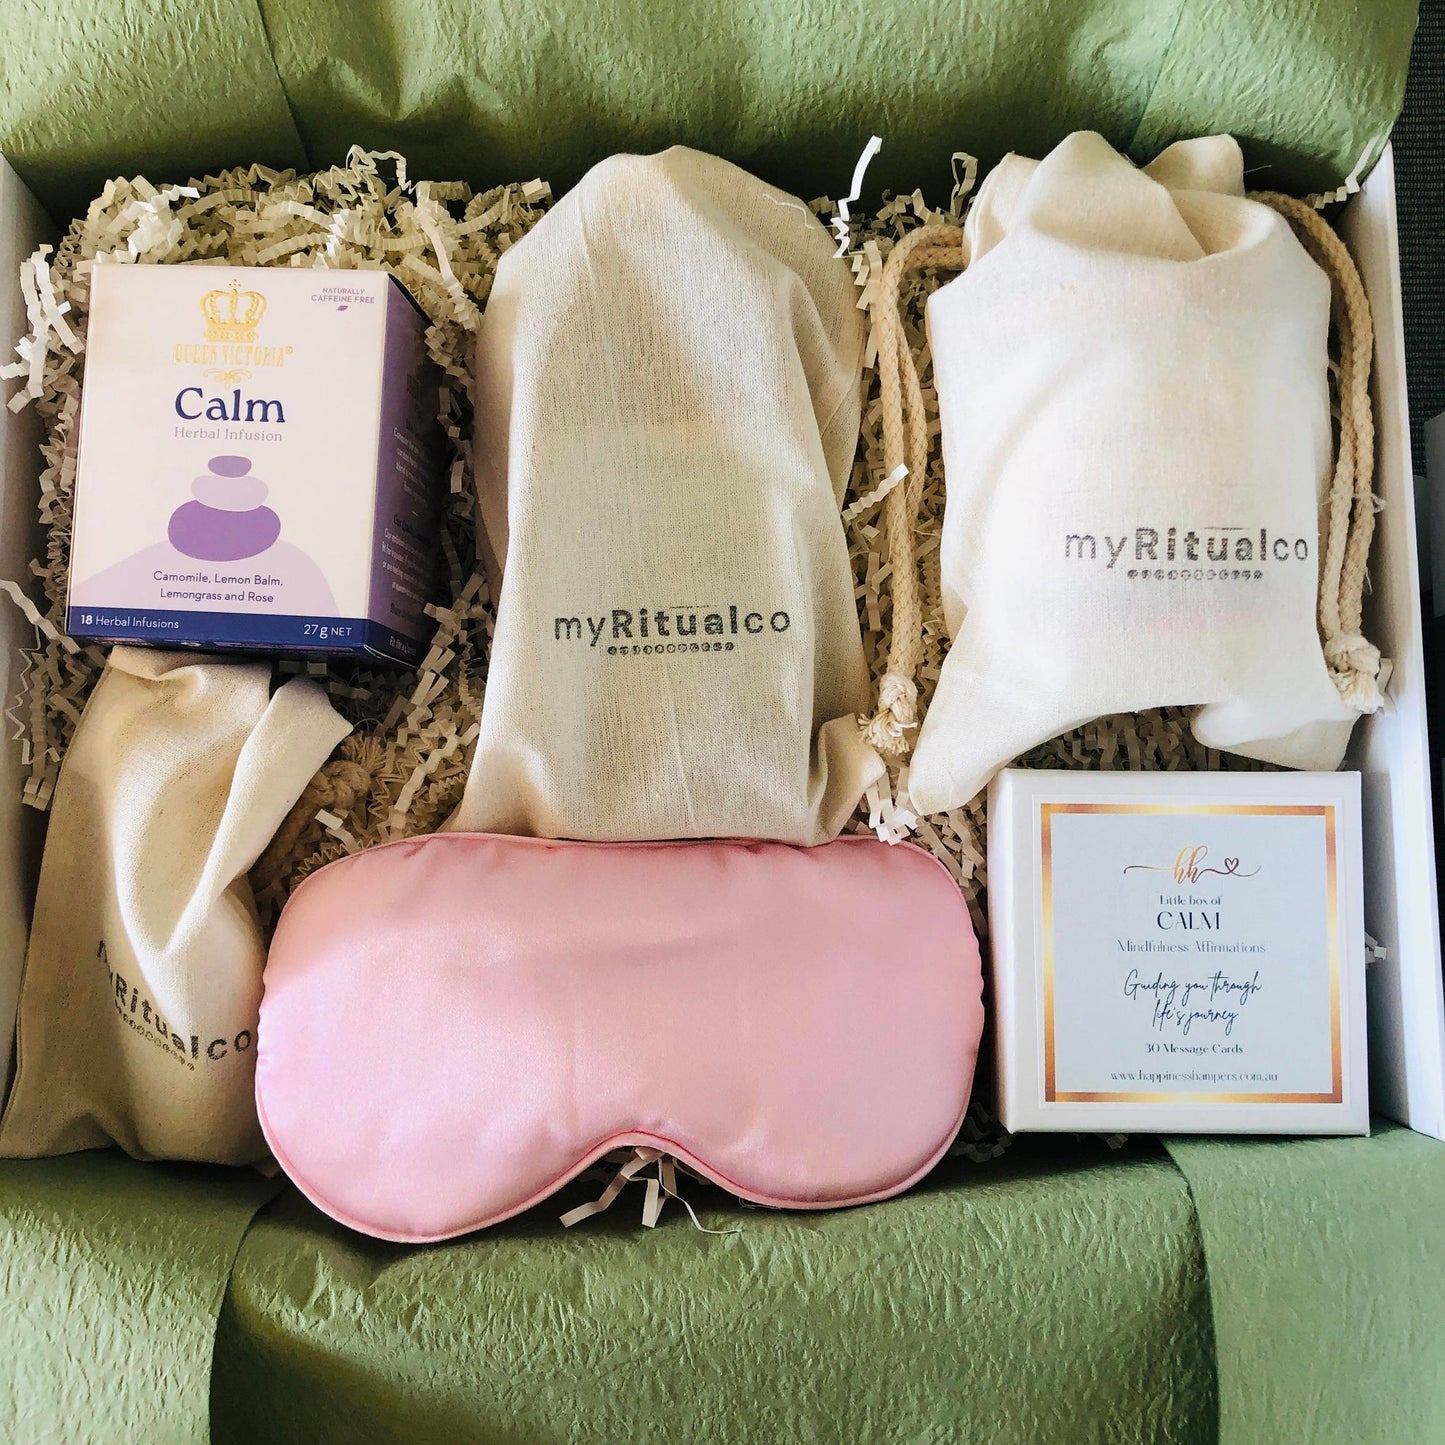 Spirit of a child miscarriage gift hamper contents - shop miscarriage - infant loss and child loss hampers Australia - Happiness Hampers